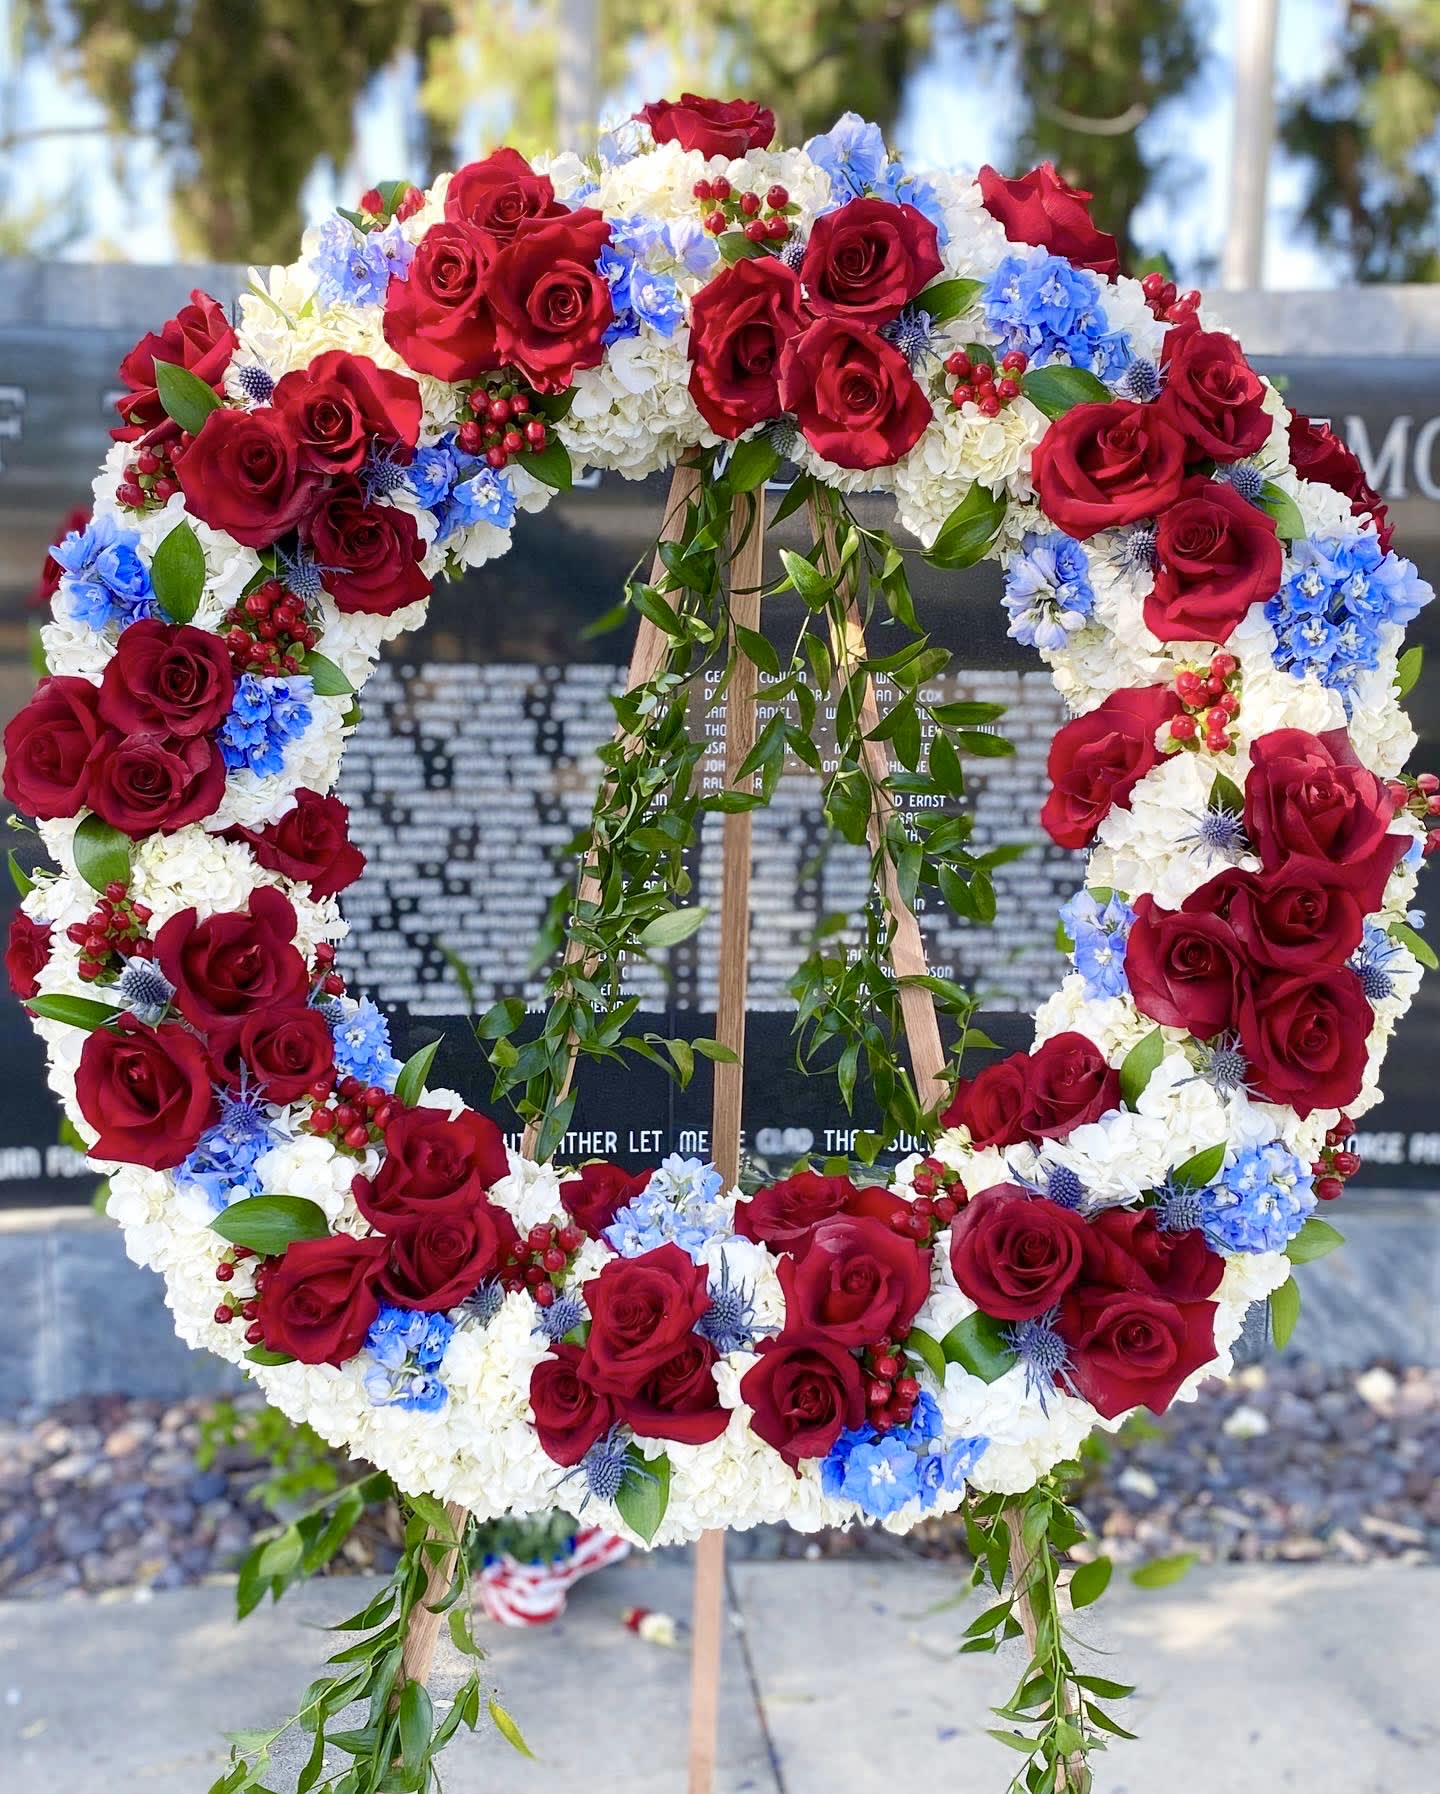 Red, White and Blue Wreath - An abundant wreath of hydrangeas, roses, and blue accent florals.  